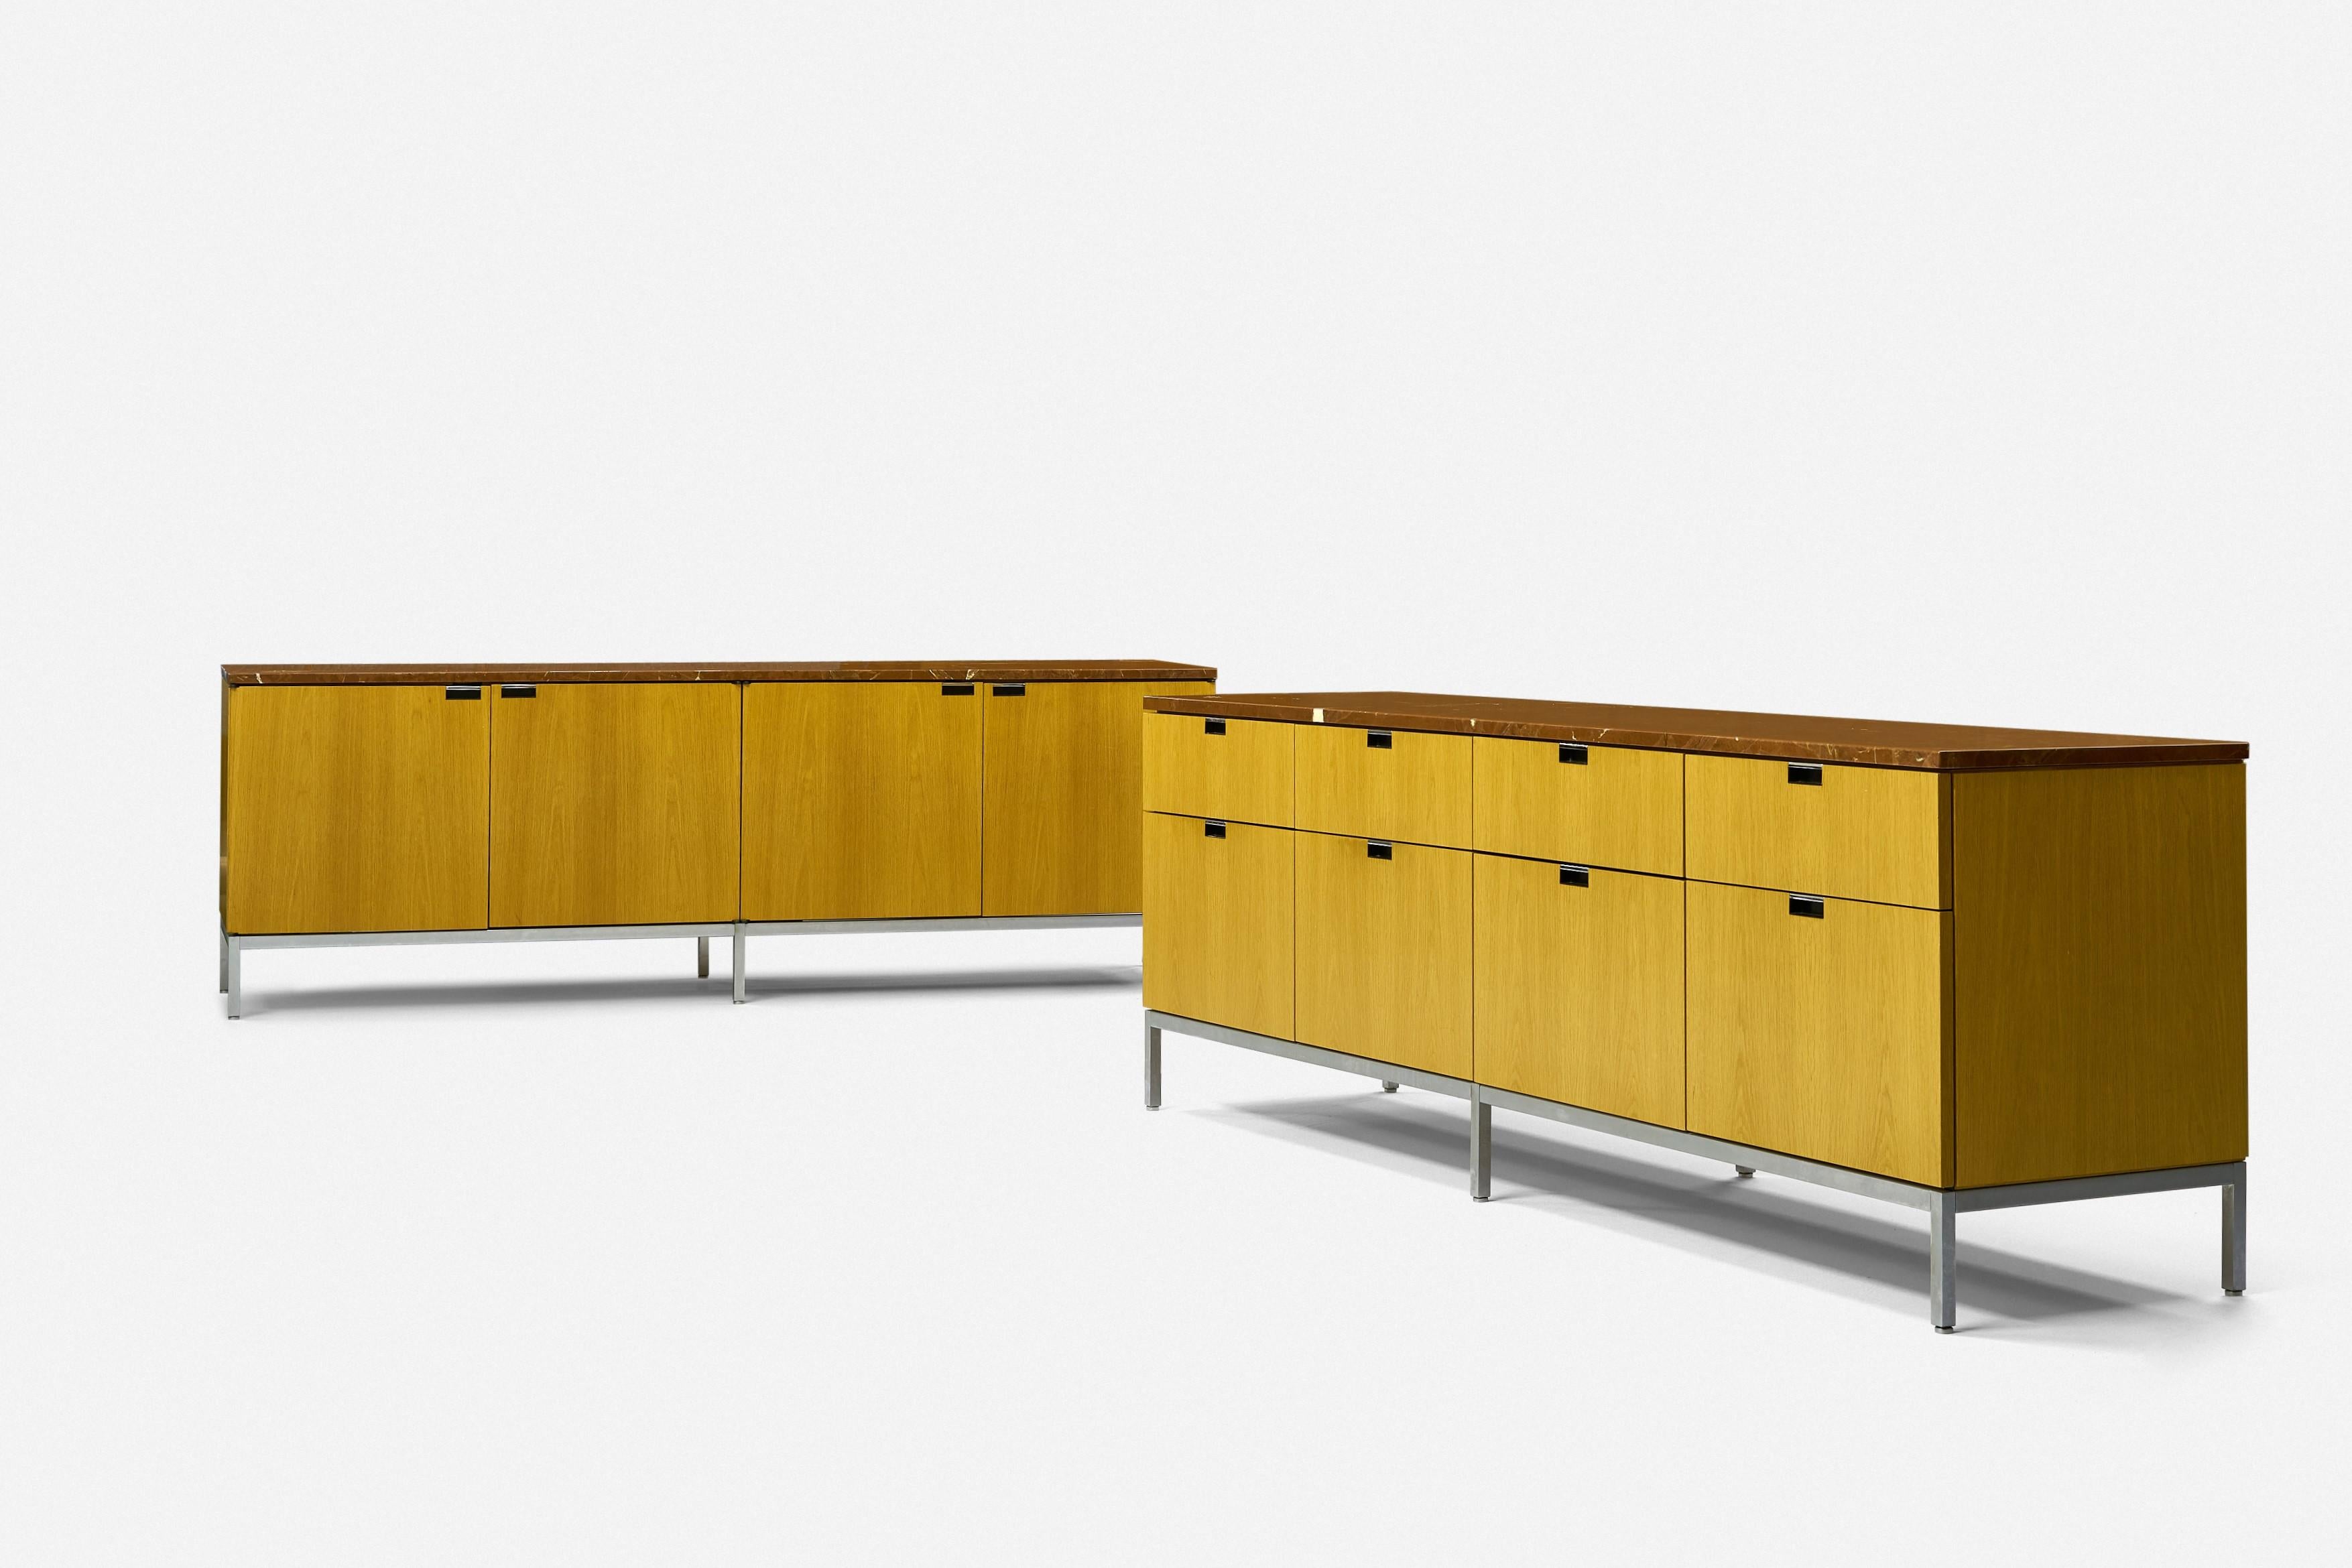 Florence Knoll

Pair of credenzas 
Knoll Associates
USA, 1961 design date
Oak veneer, marble, chrome-plated steel, aluminum.

One cabinet has adjustable shelving. The tops of each cabinet have Rojo Alicante marble. This color combination is